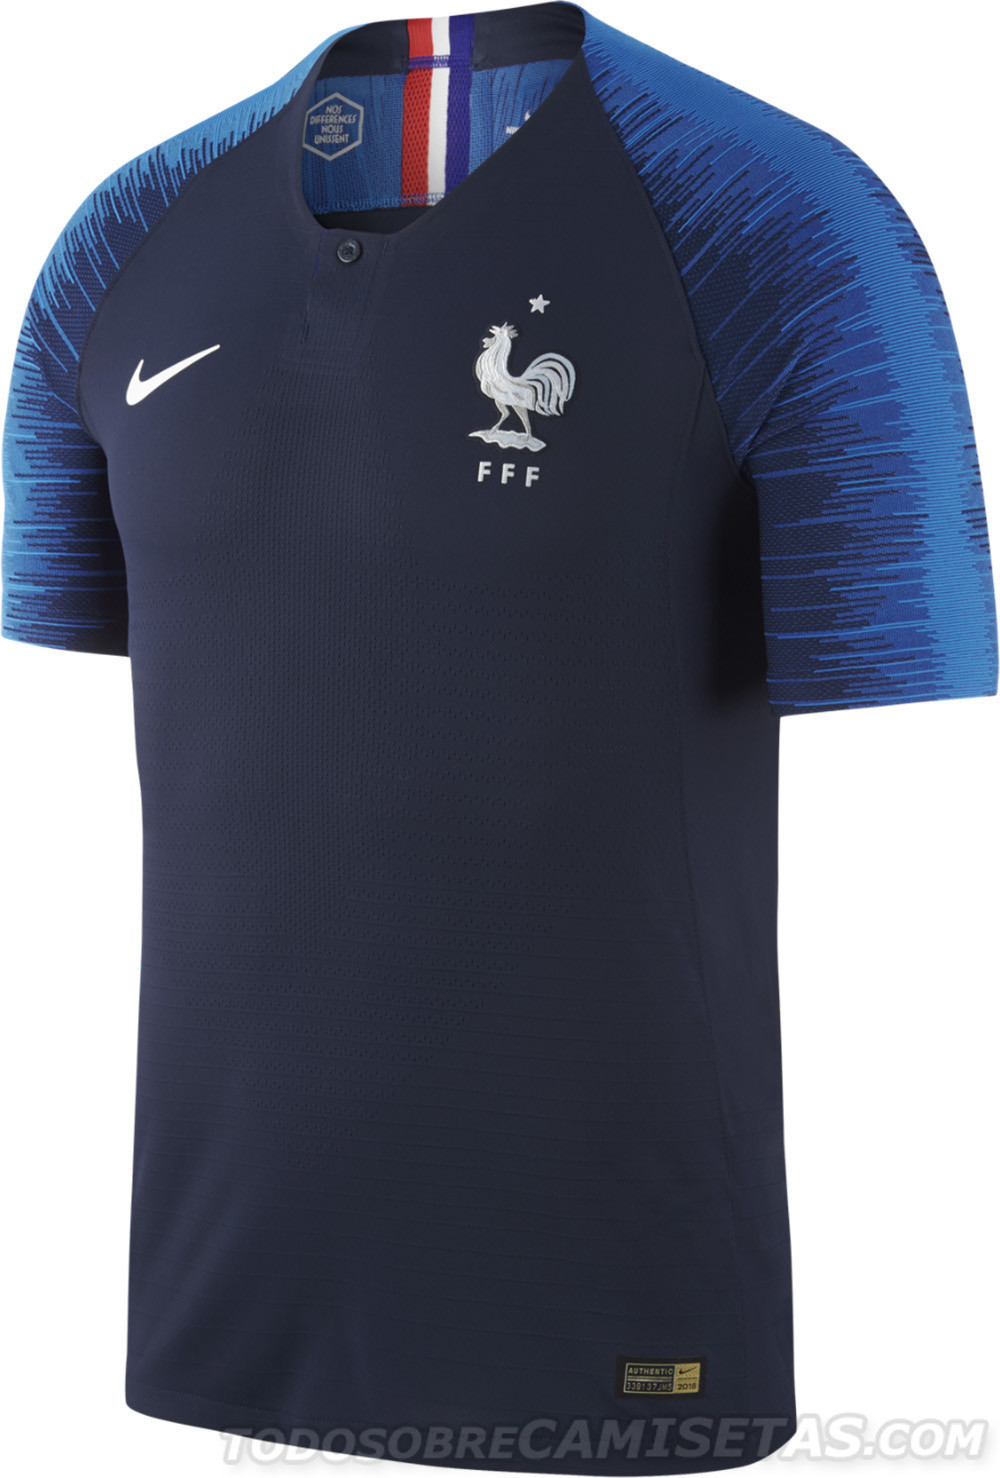 france-2018-world-cup-kits-of-7.jpg